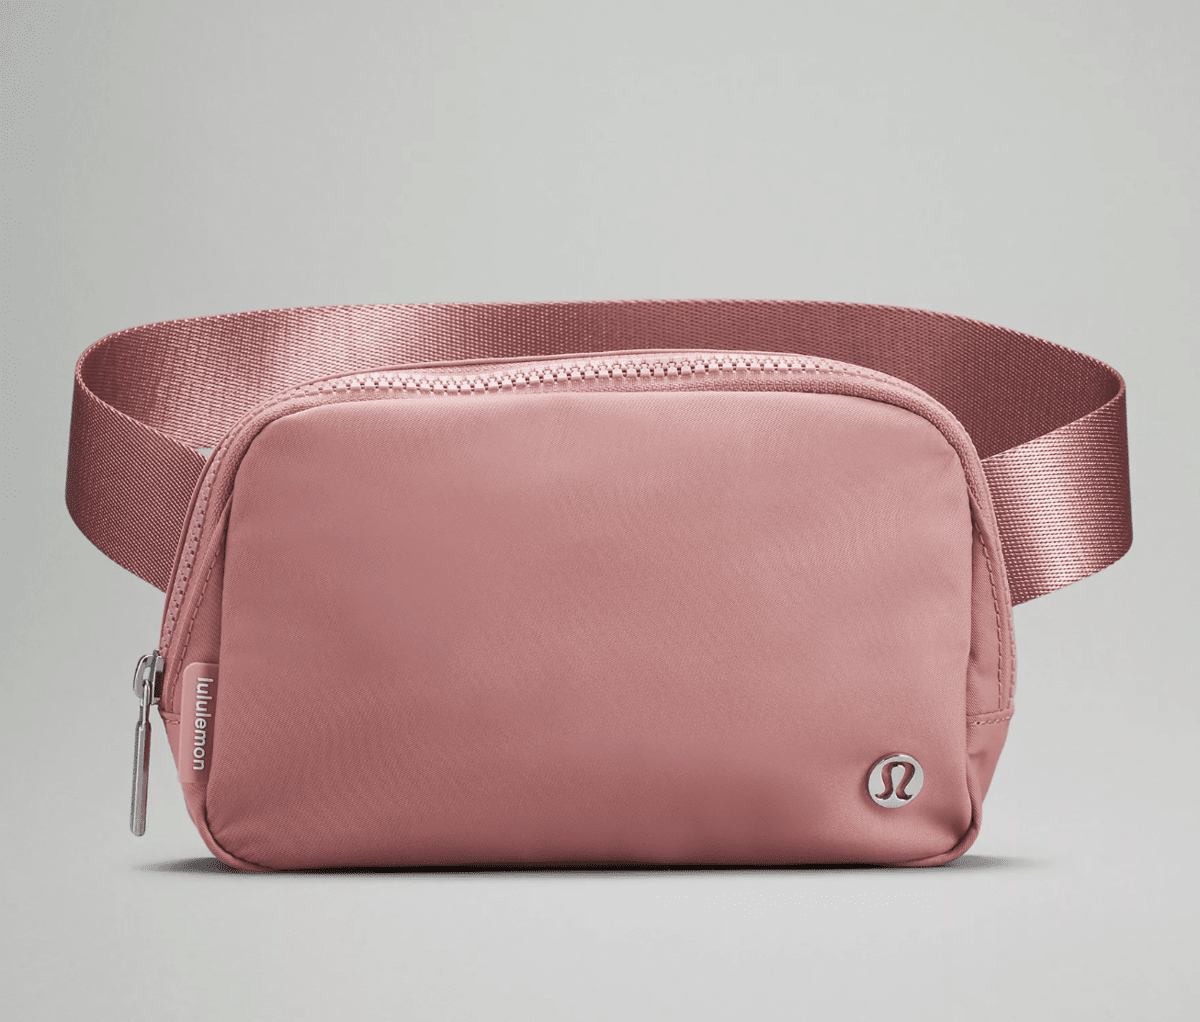 5 Mother's Day Gifts from lululemon! - Nourish, Move, Love